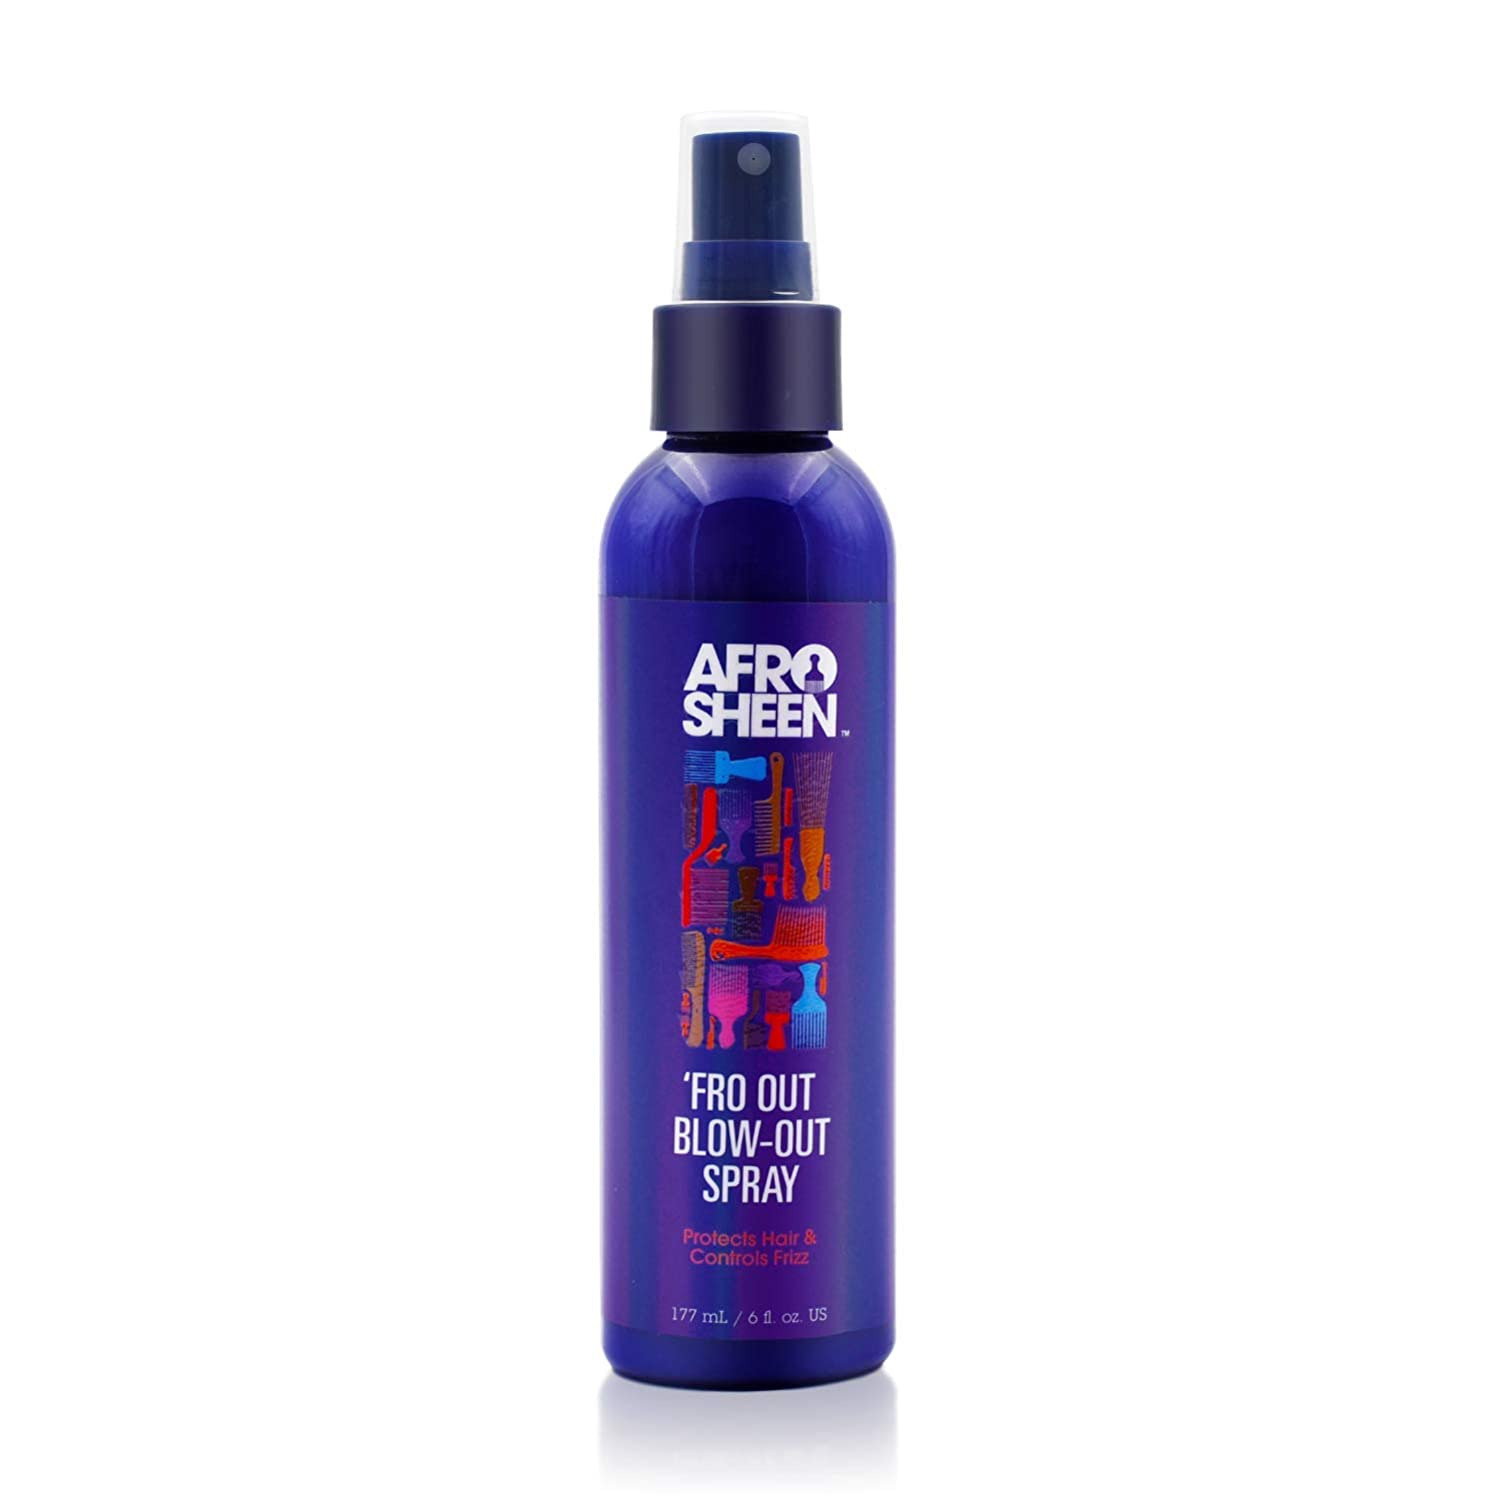 Afro Sheen 'Fro Out Blow-Out Spray. Protects Hair & Controls Fizz. 6 Oz.